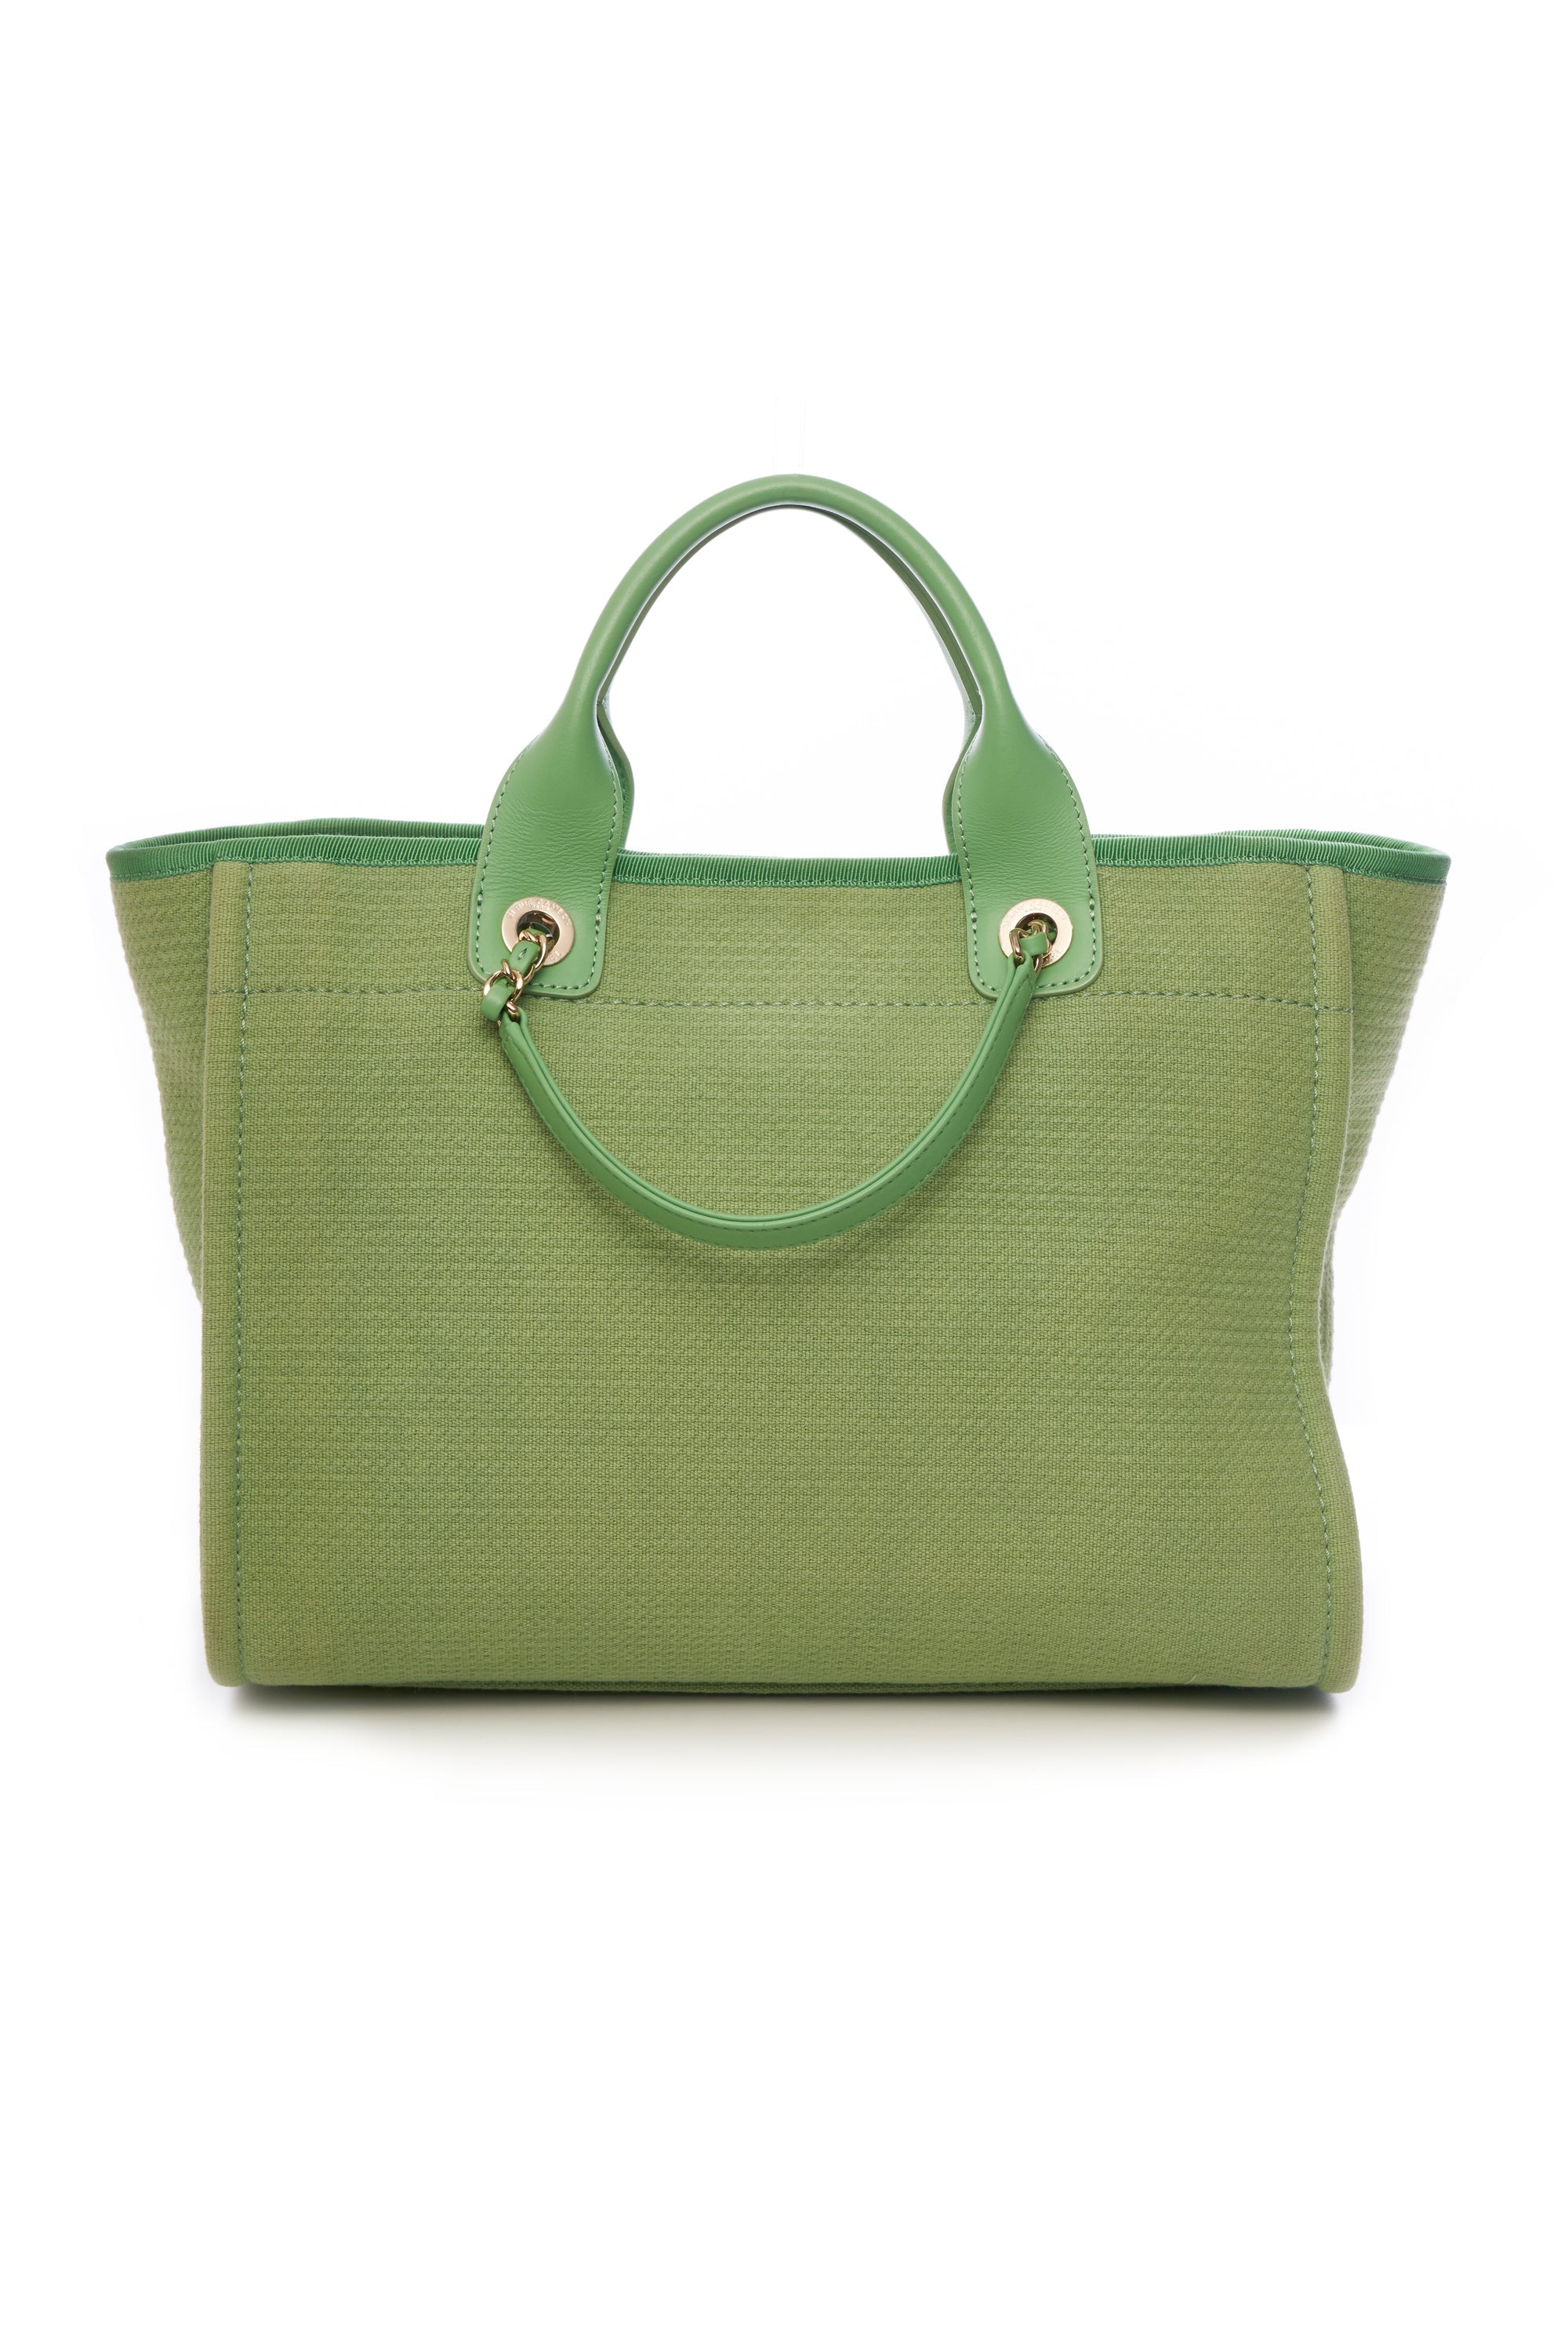 Chanel Green Deauville Tote Bag